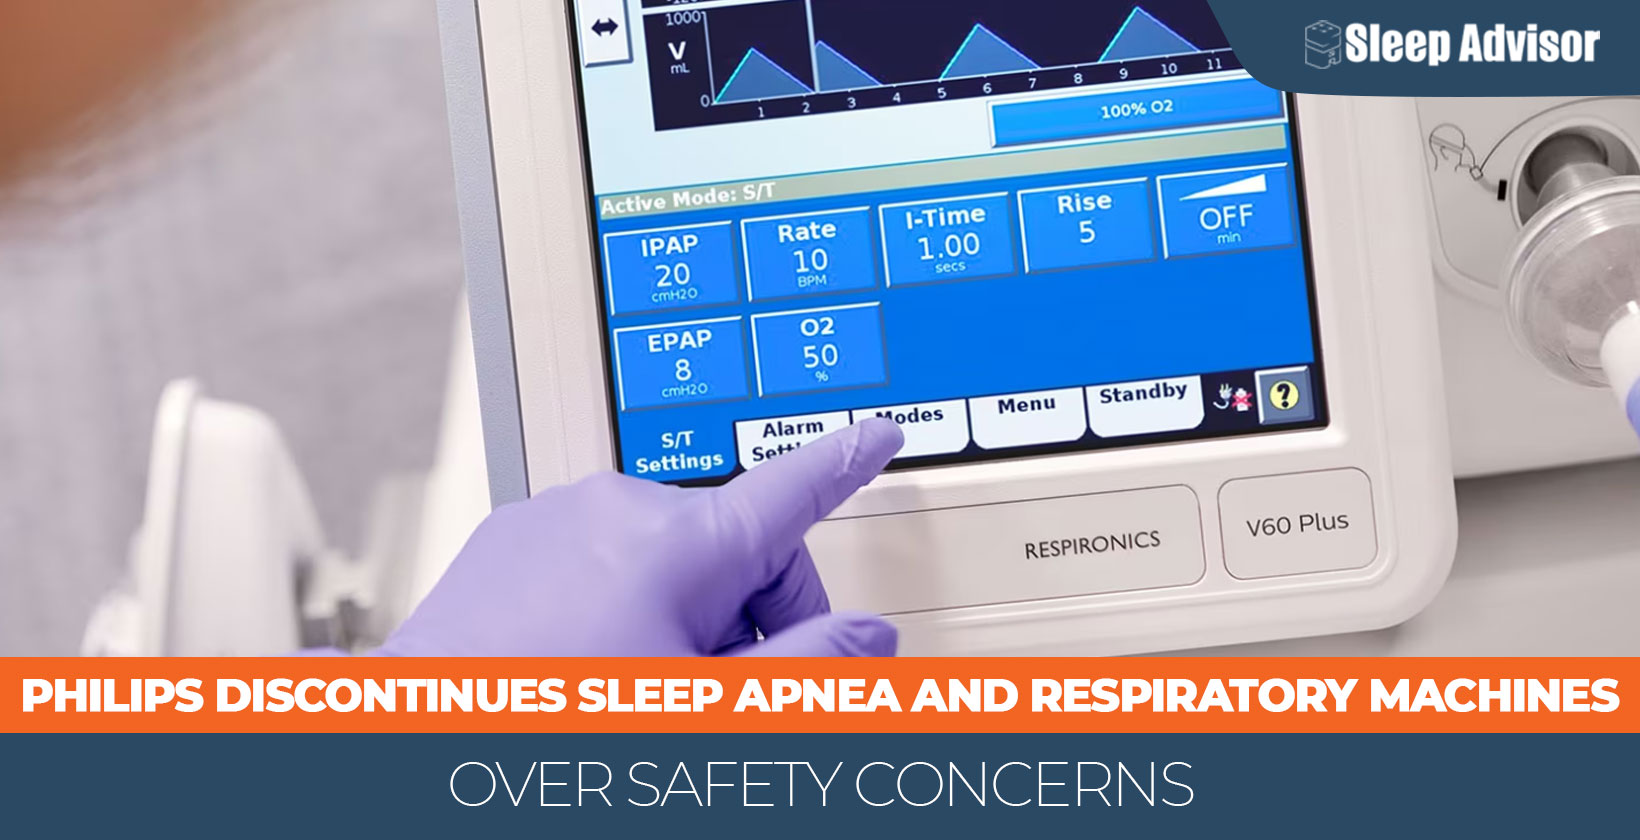 Philips Discontinues Sleep Apnea and Respiratory Machines Over Safety Concerns